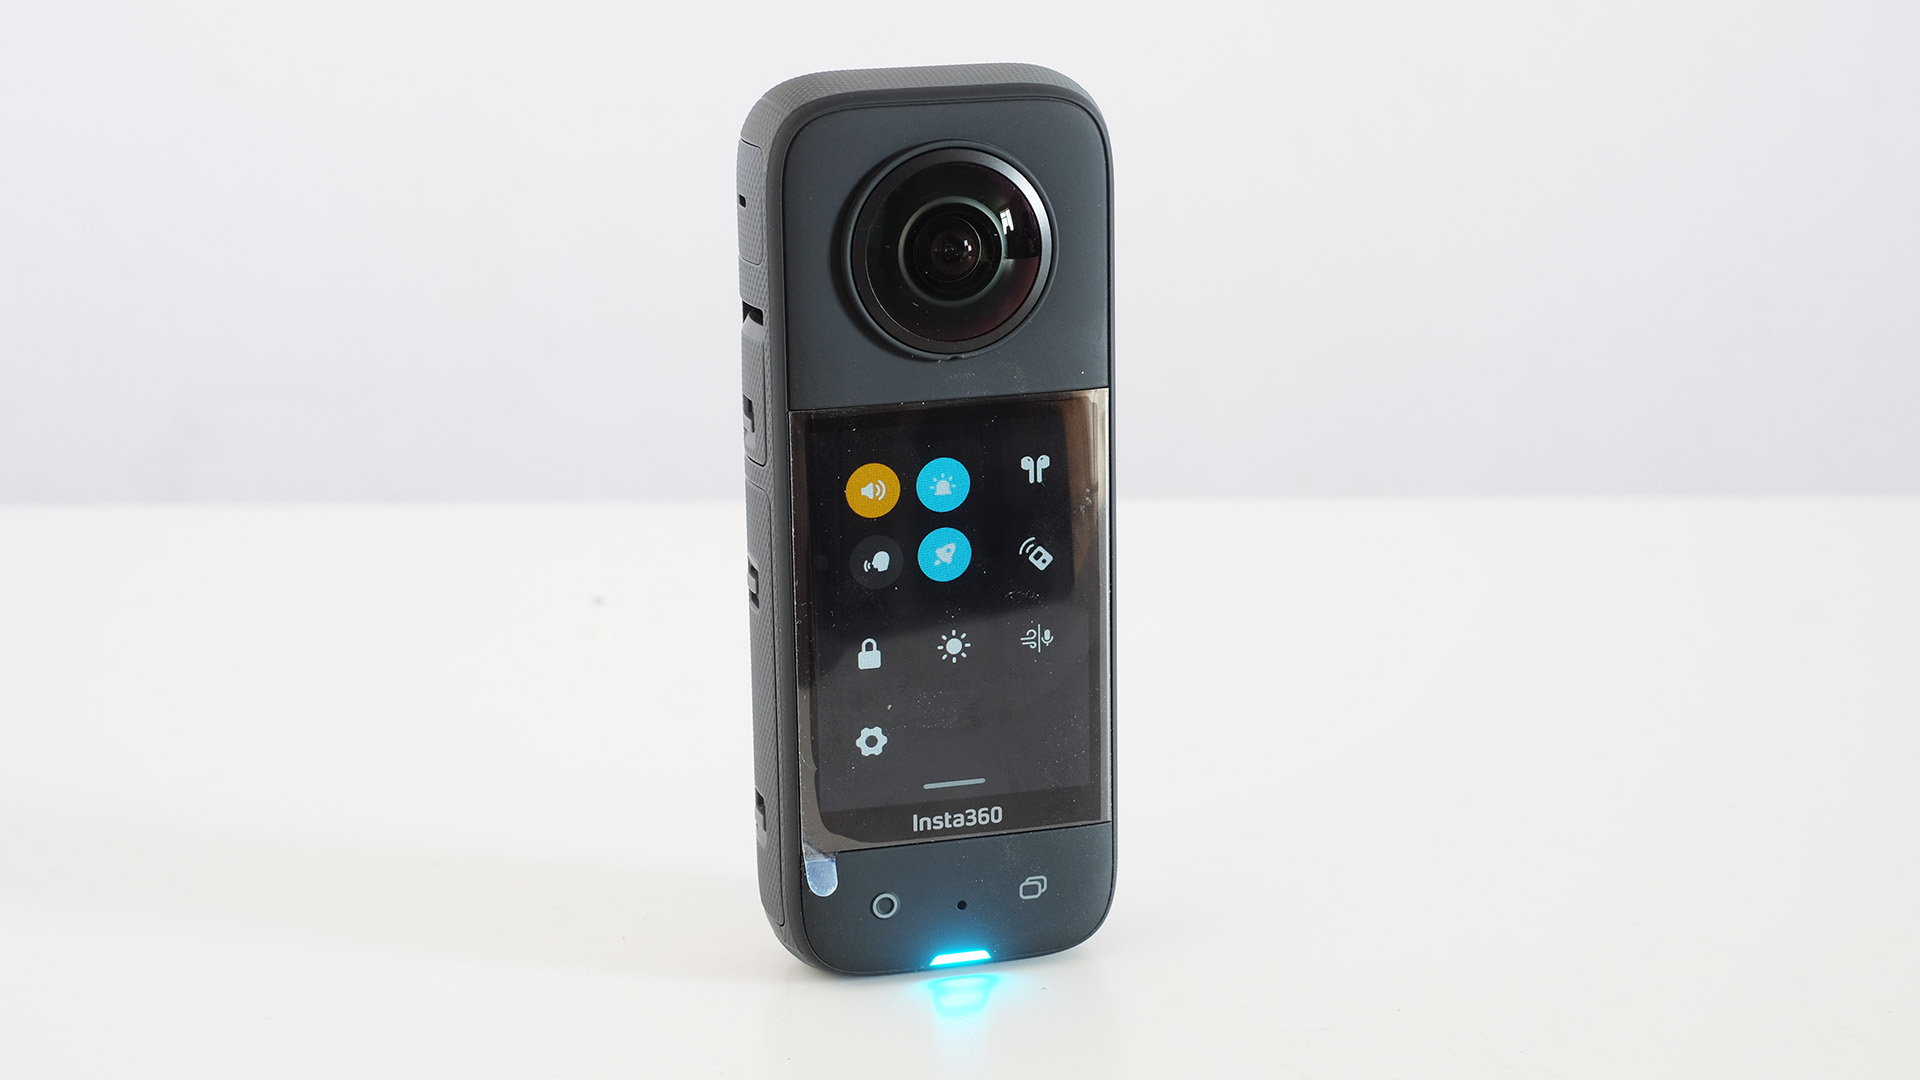 Hands On With the Insta360 X3 Dual-Lens Action Cam